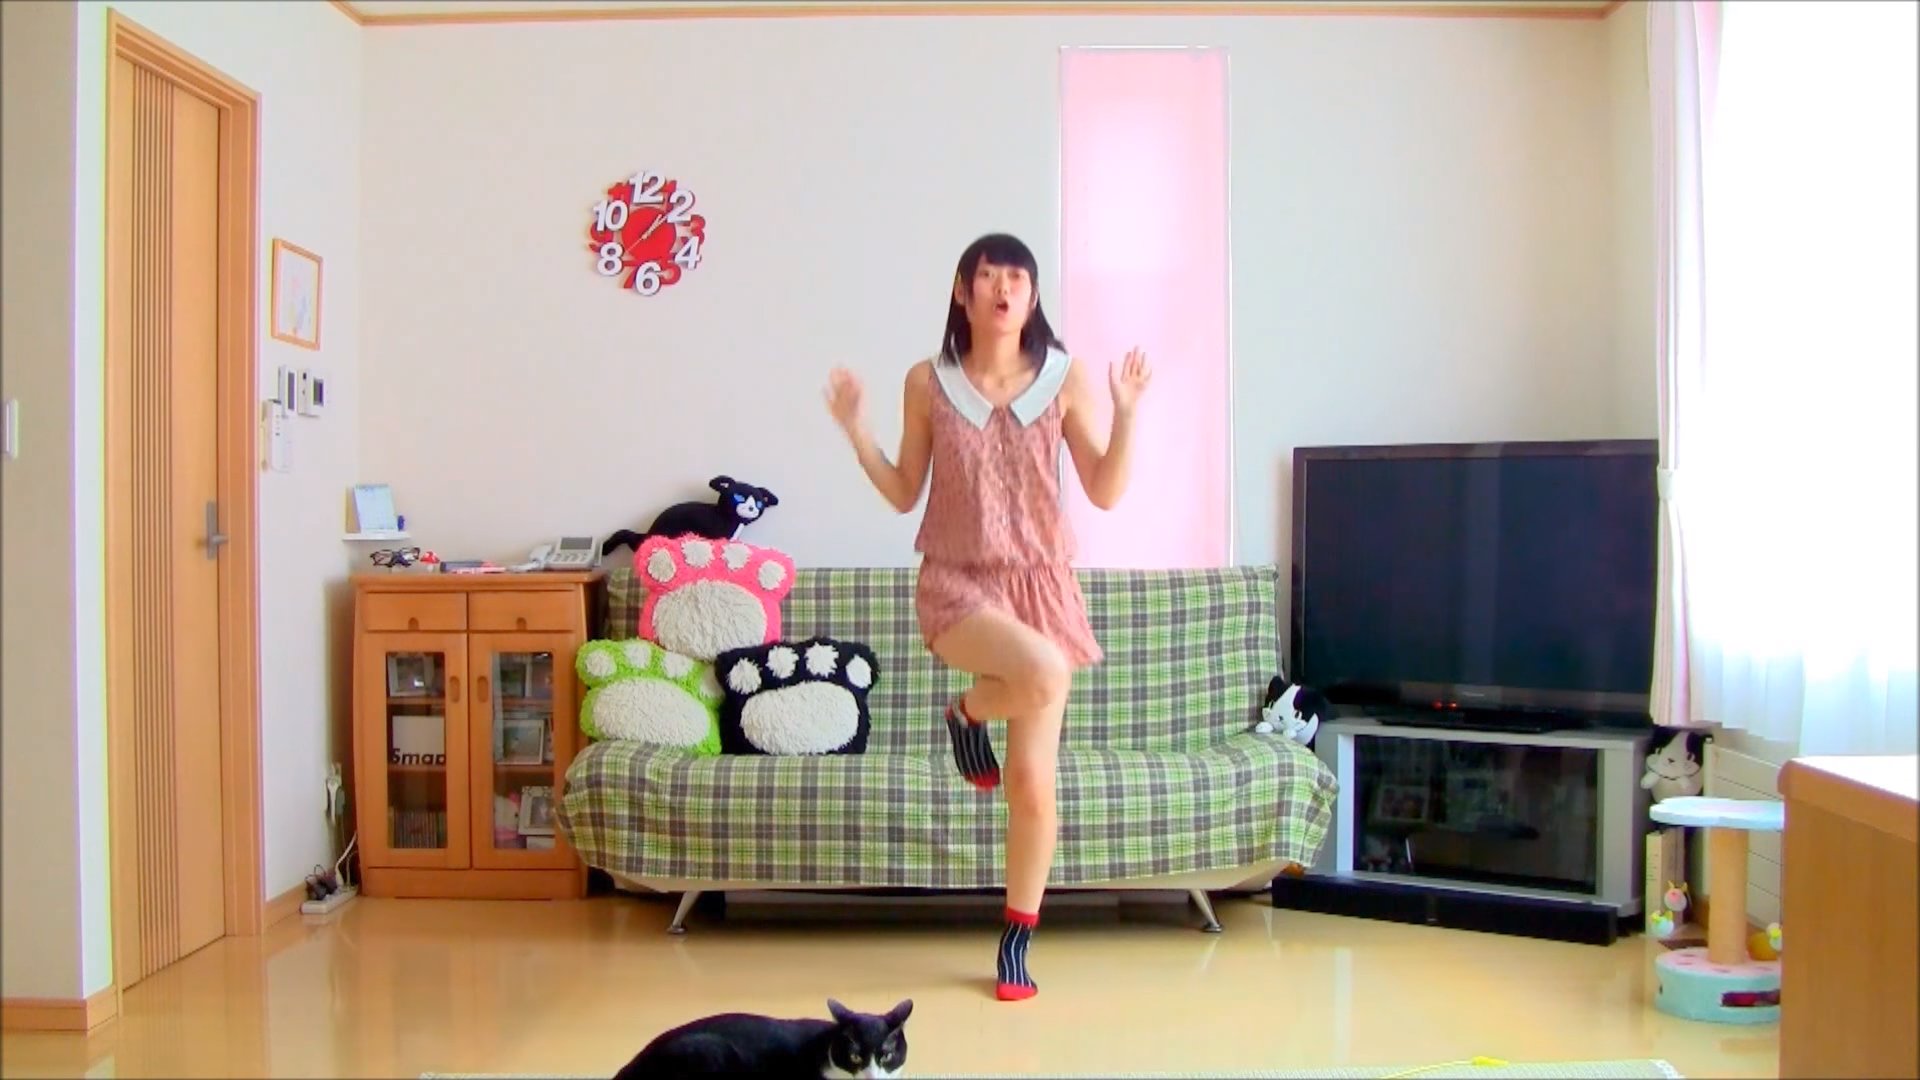 Hima &#8211; Fit&#8217;s Dance (dance cover) gallery image No. 1